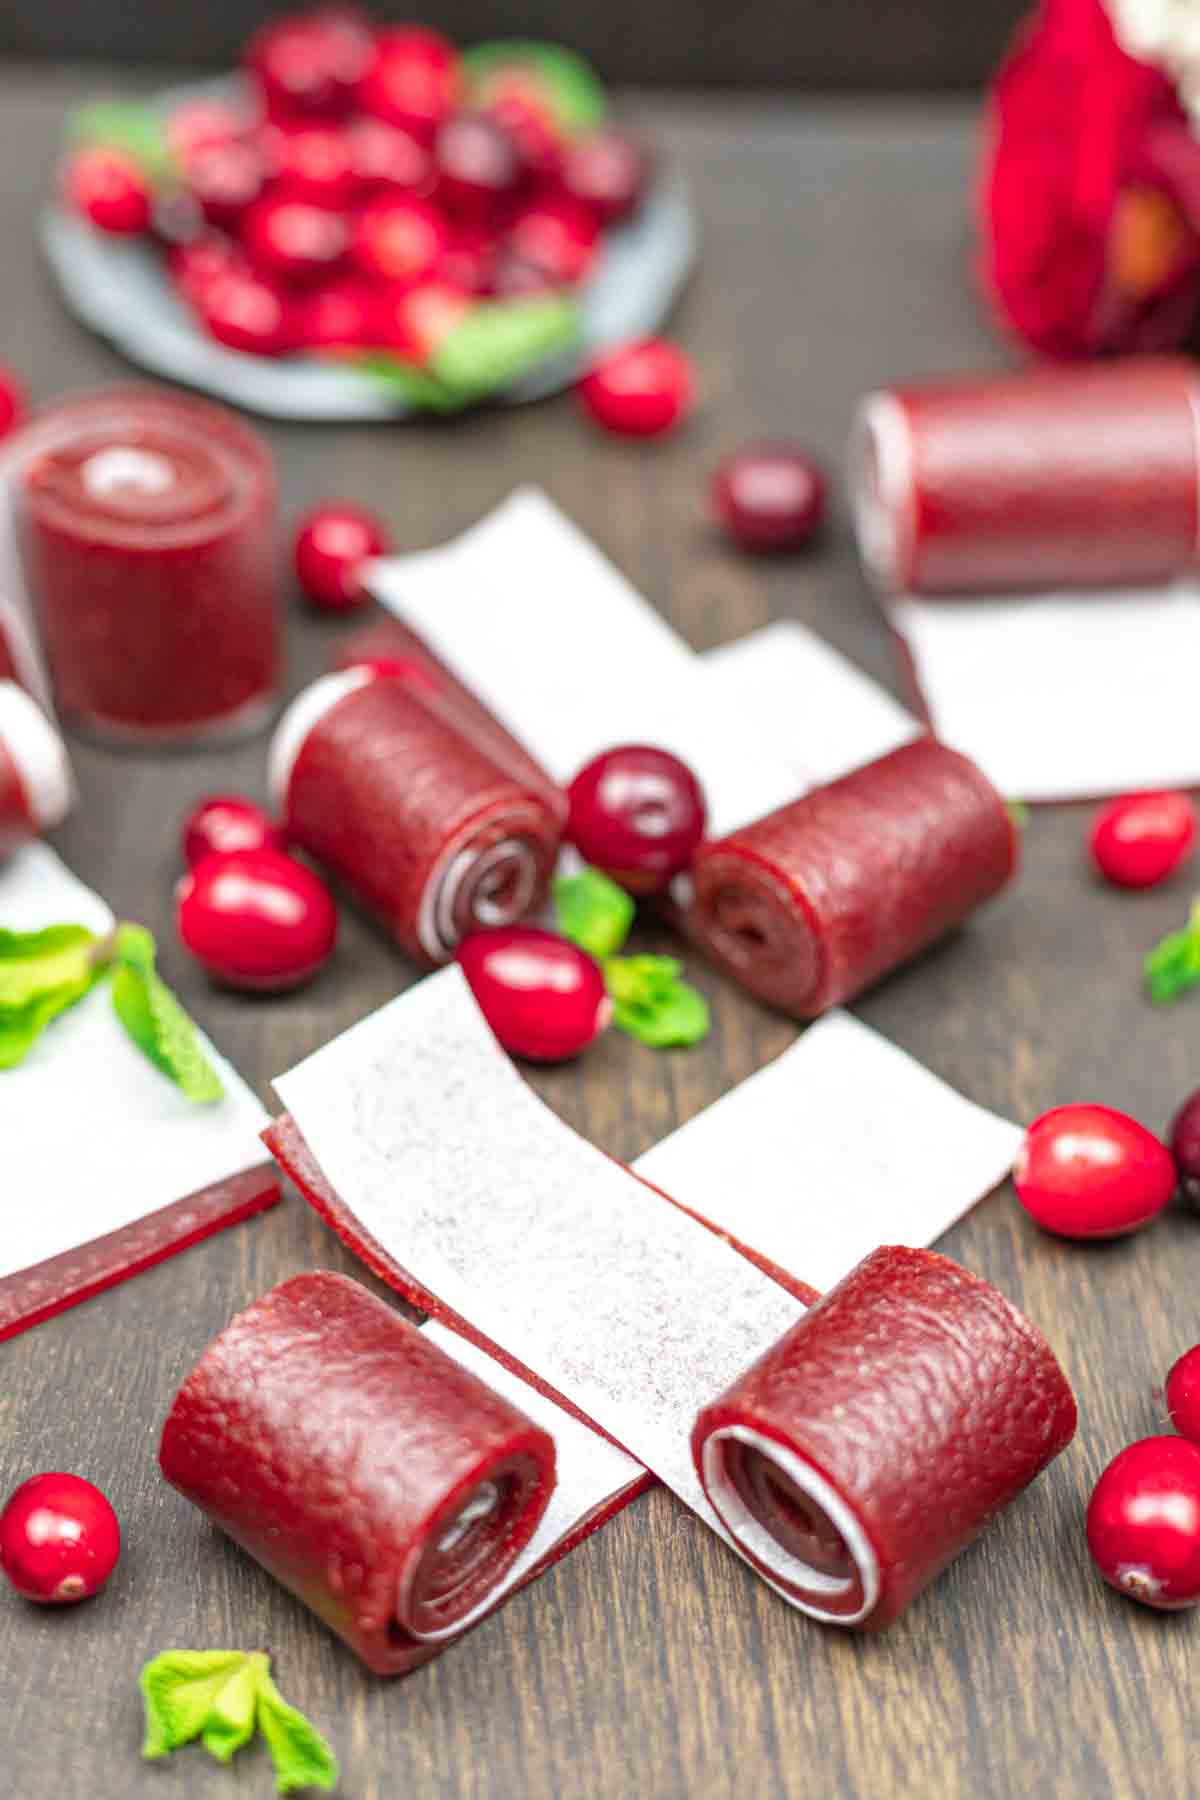 Cranberry roll ups on a wooden table.